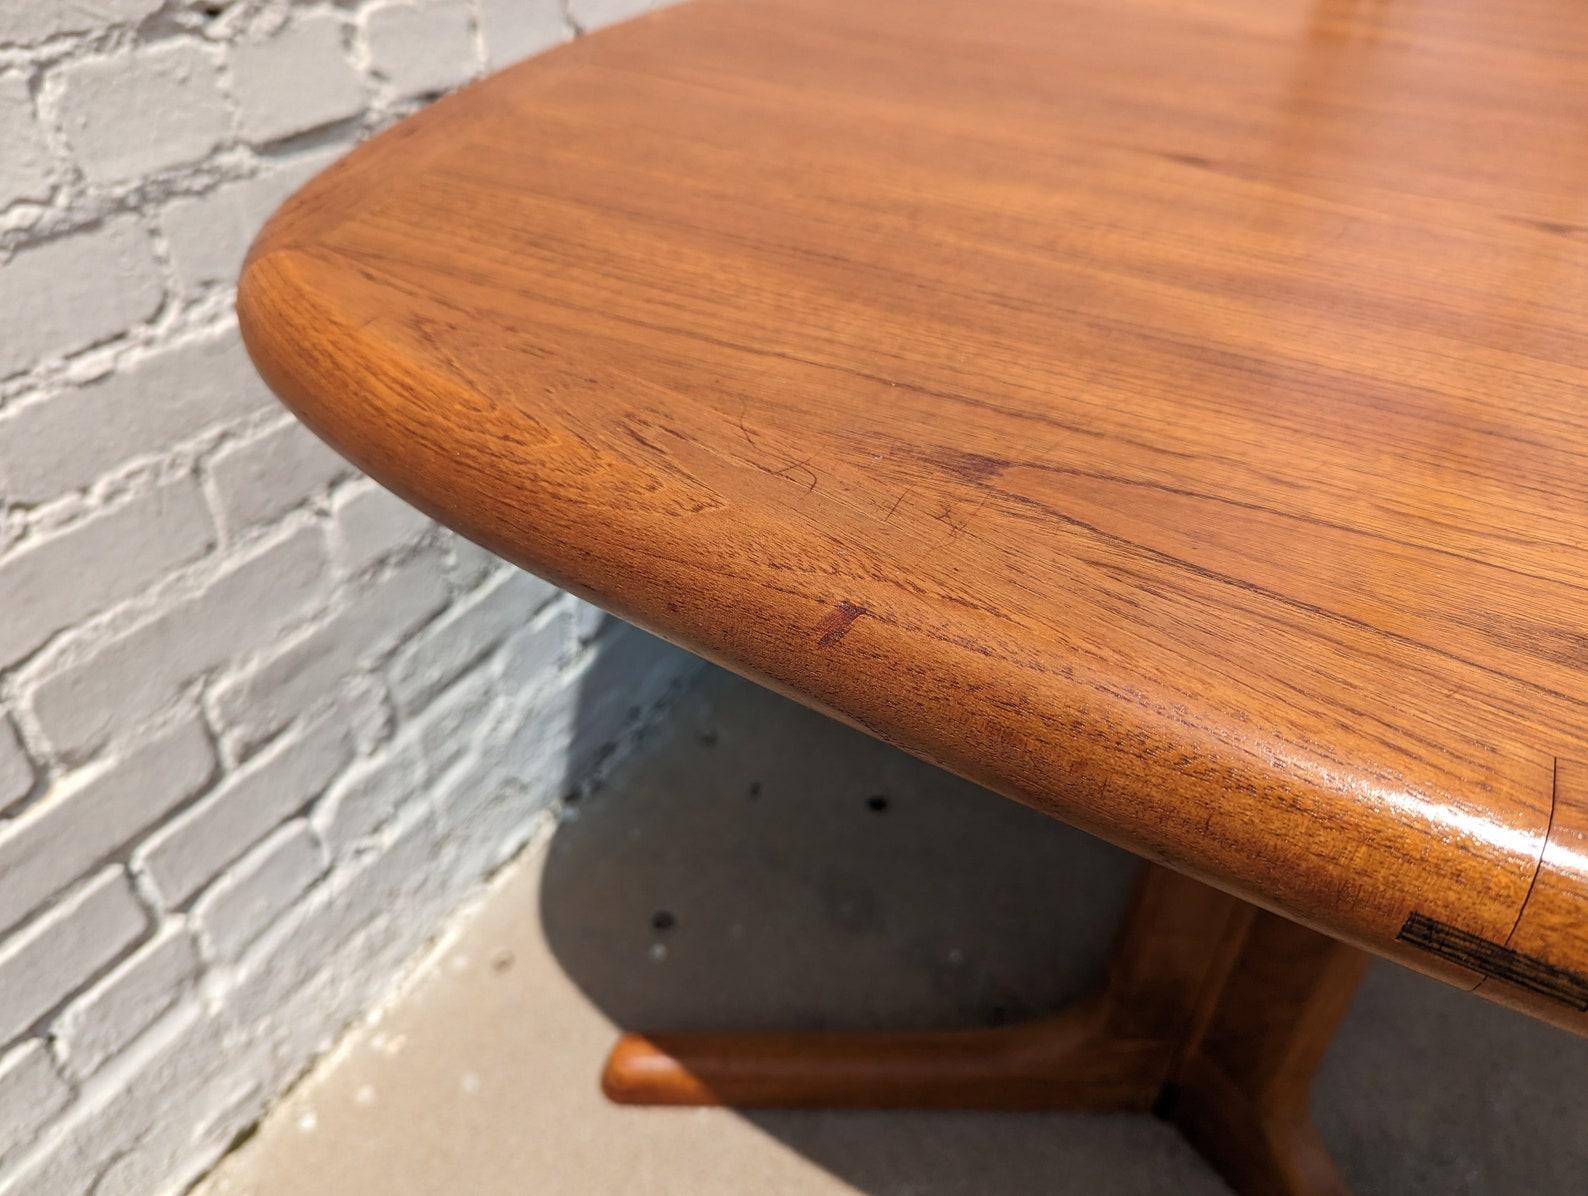 Mid Century Danish Modern Teak Dining Table

Above average vintage condition and structurally sound. Has some expected slight finish wear and scratching. Has a couple small dings and discolorations on top. Has two extension leaves. Outdoor listing